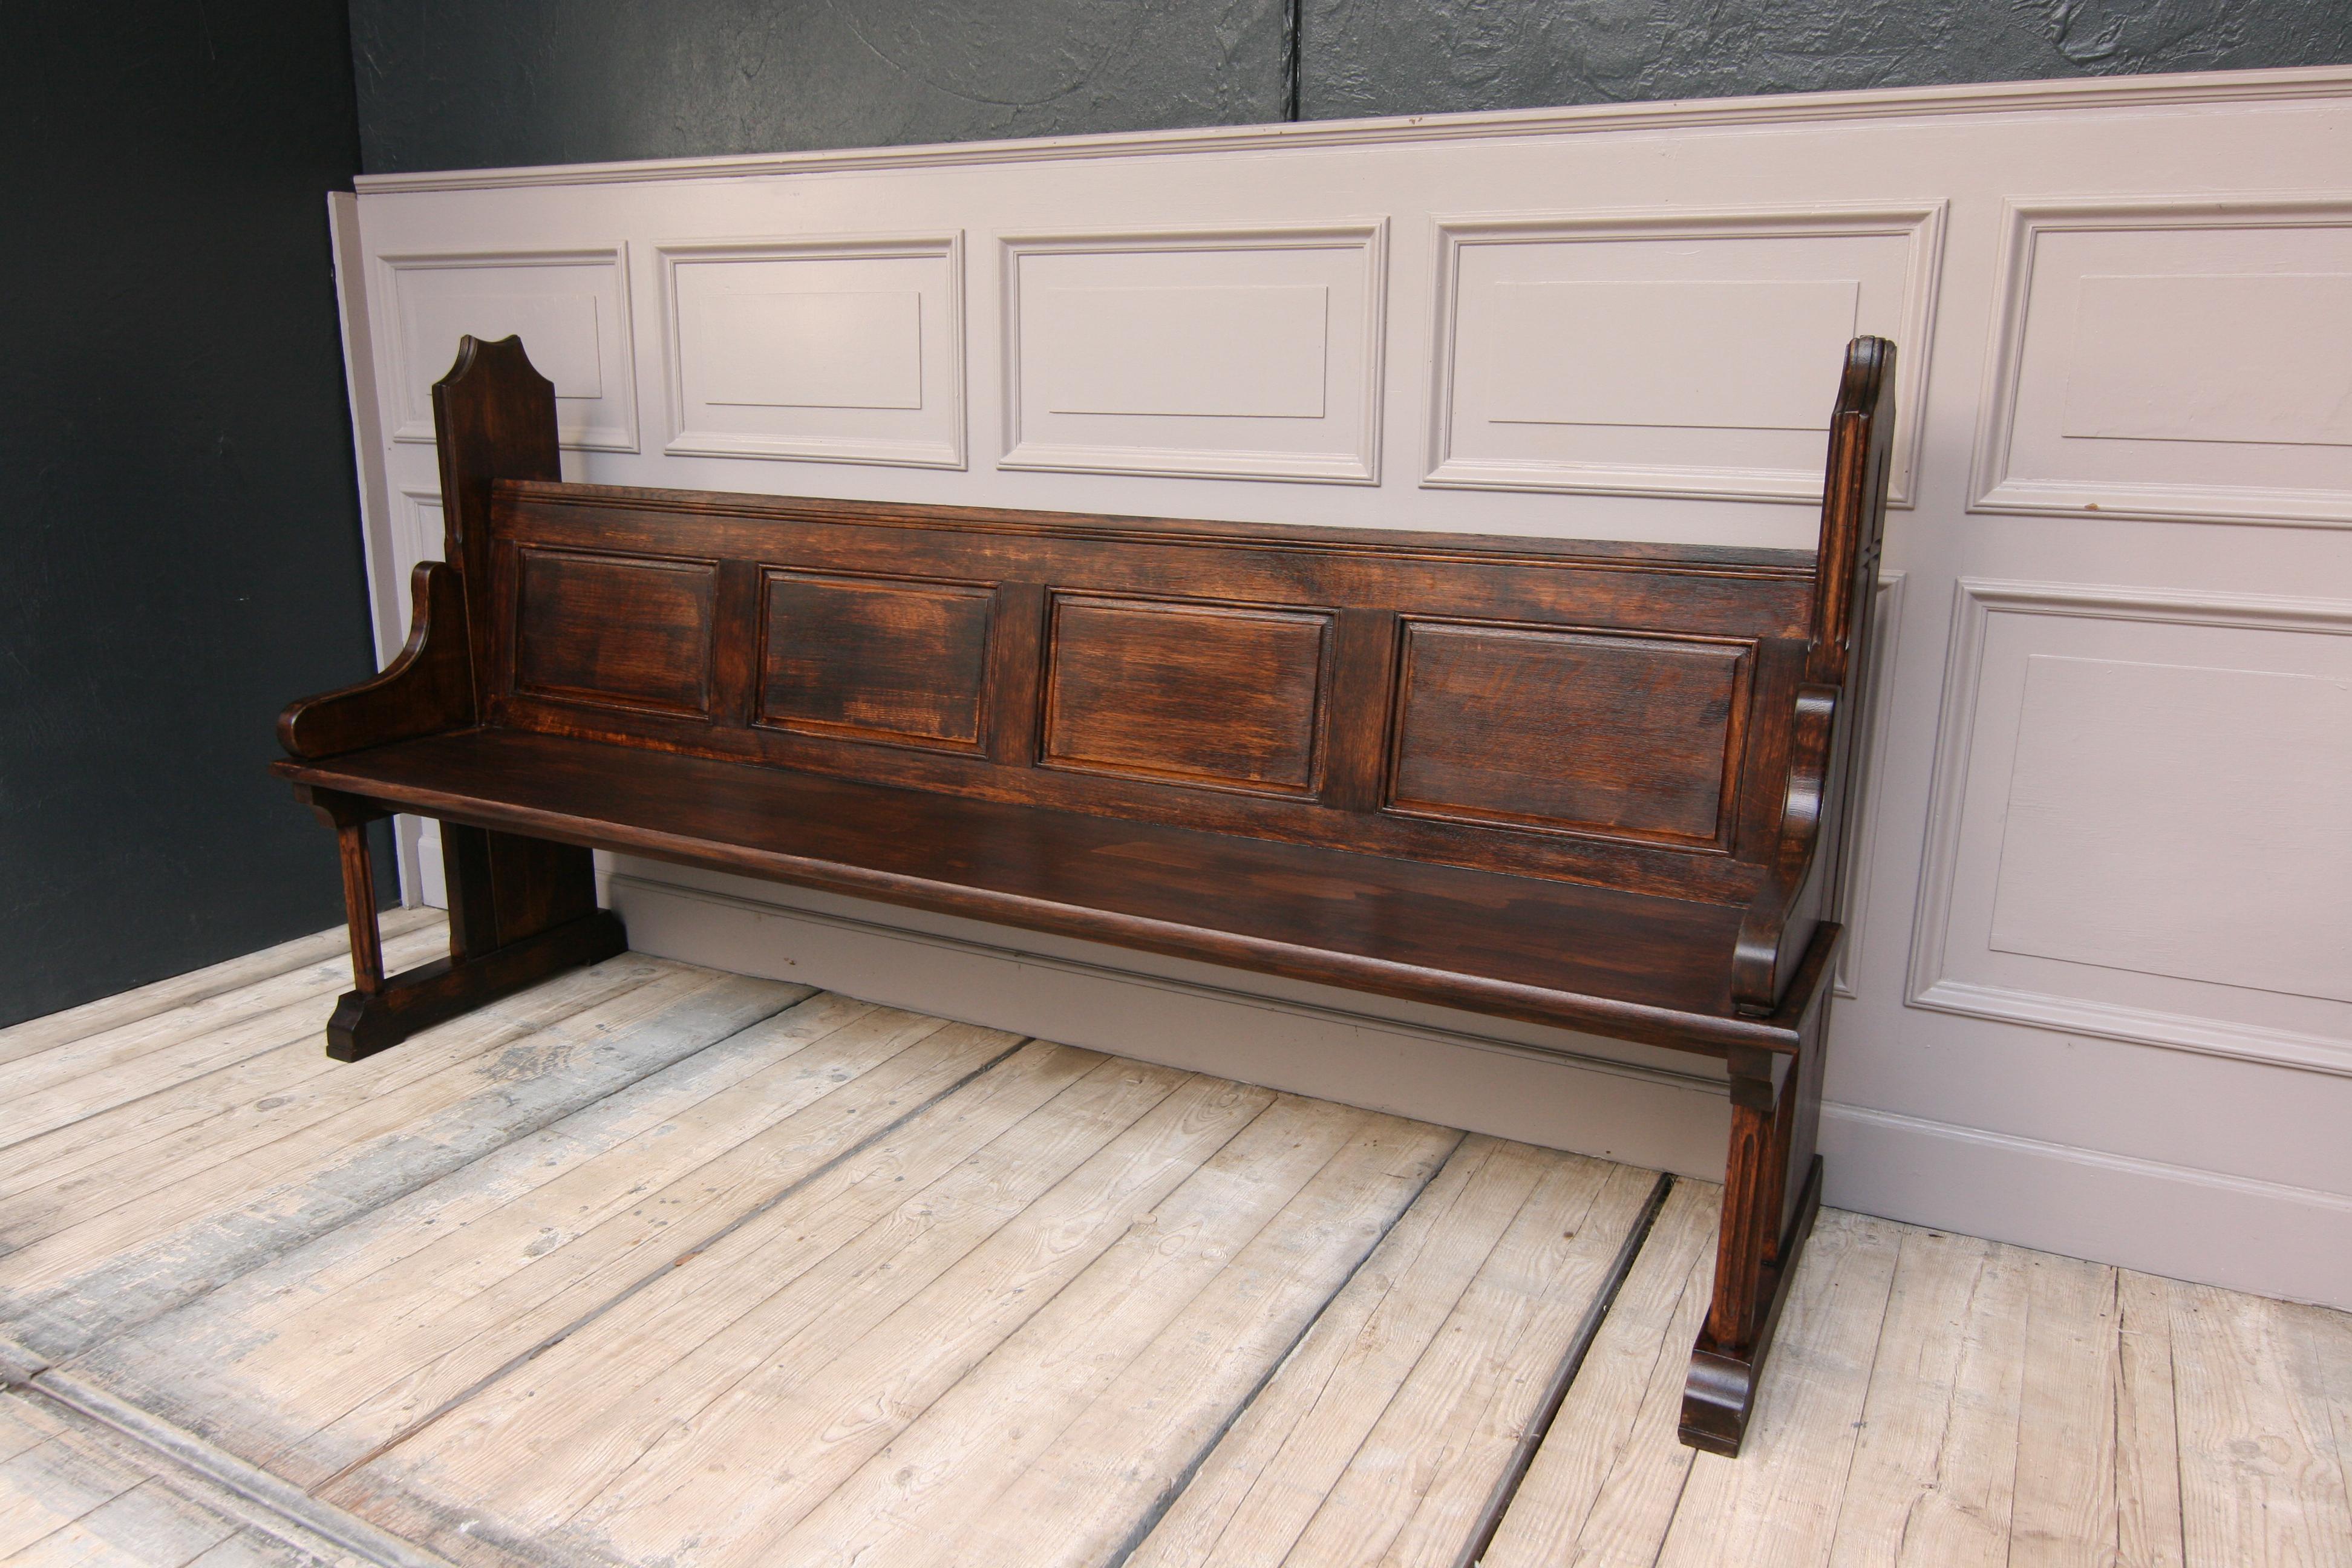 Large set of 8 (4-seat) church pews from the 